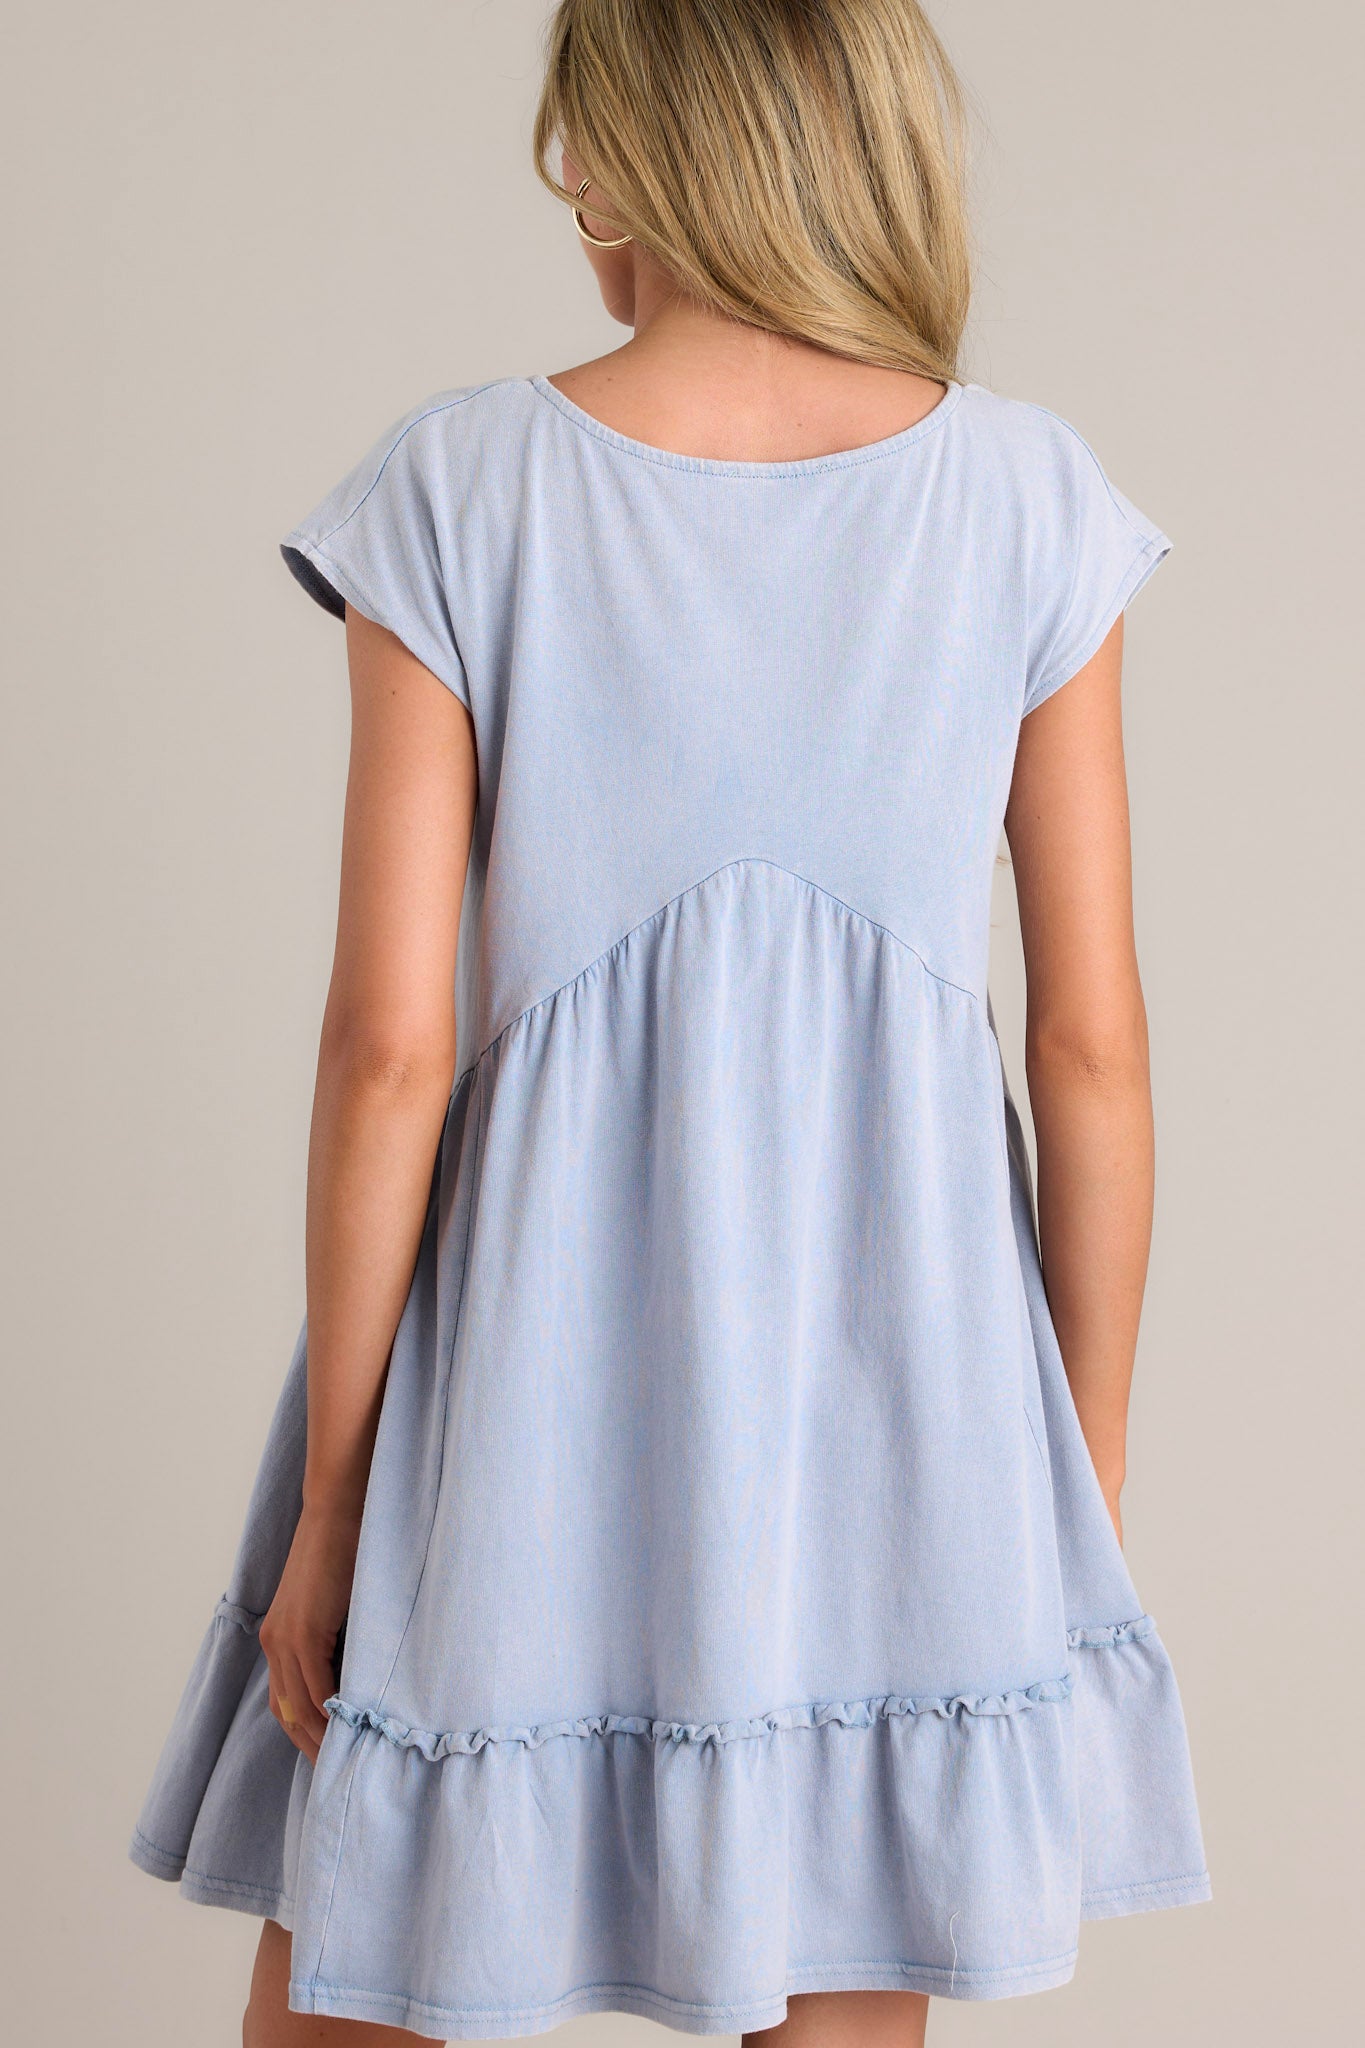 Back view of a blue mini dress highlighting the ruching below the bust line and the short cap sleeves.